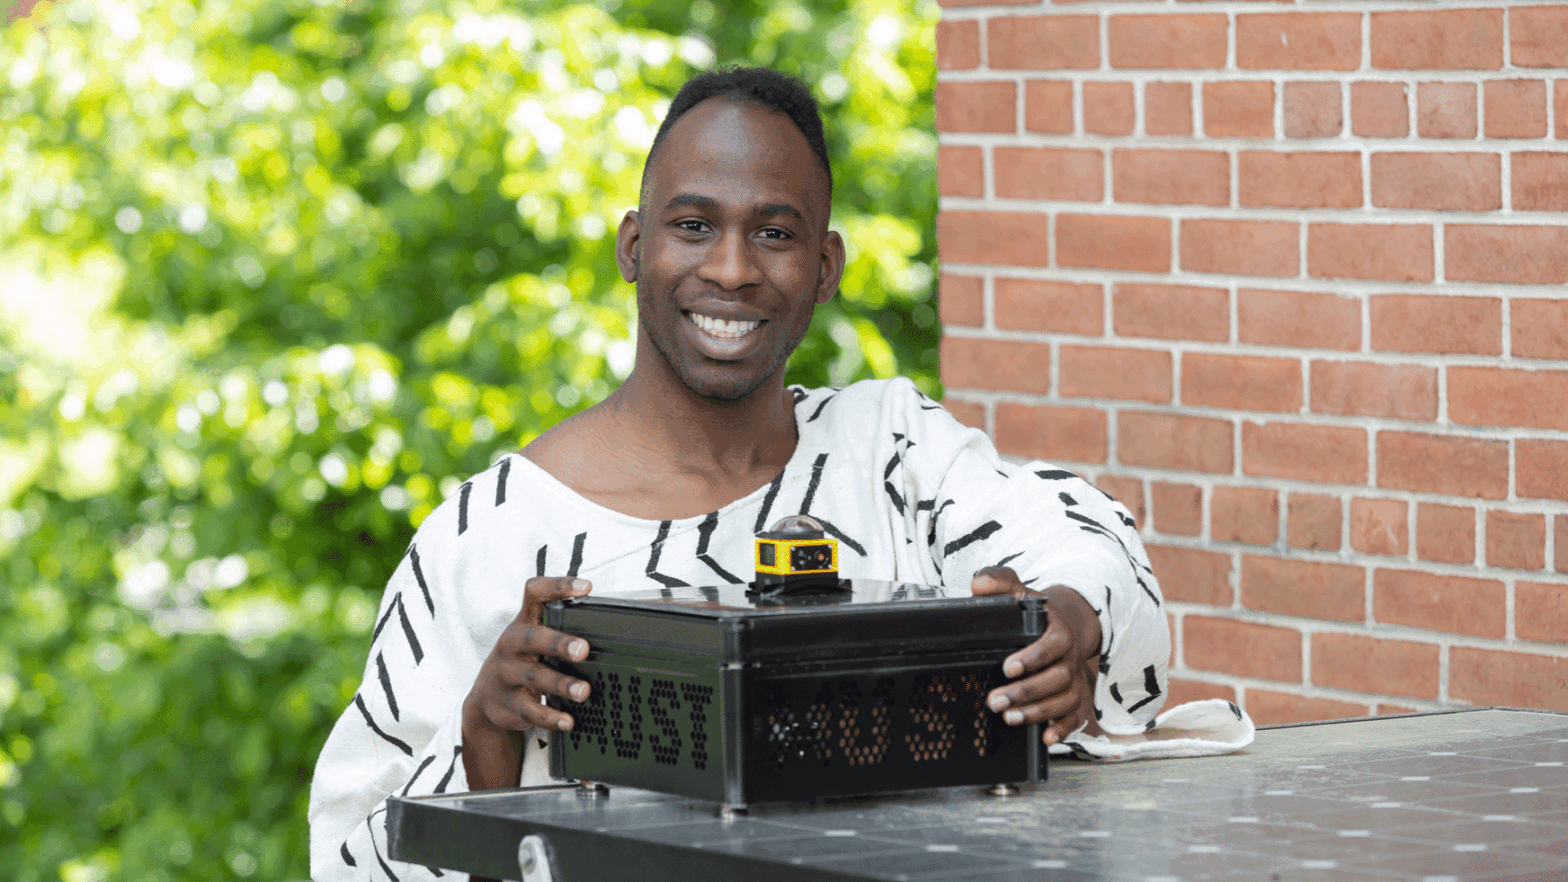 Jovan Aigbekaen holding a metal box containing air quality sensors used for his senior thesis research.